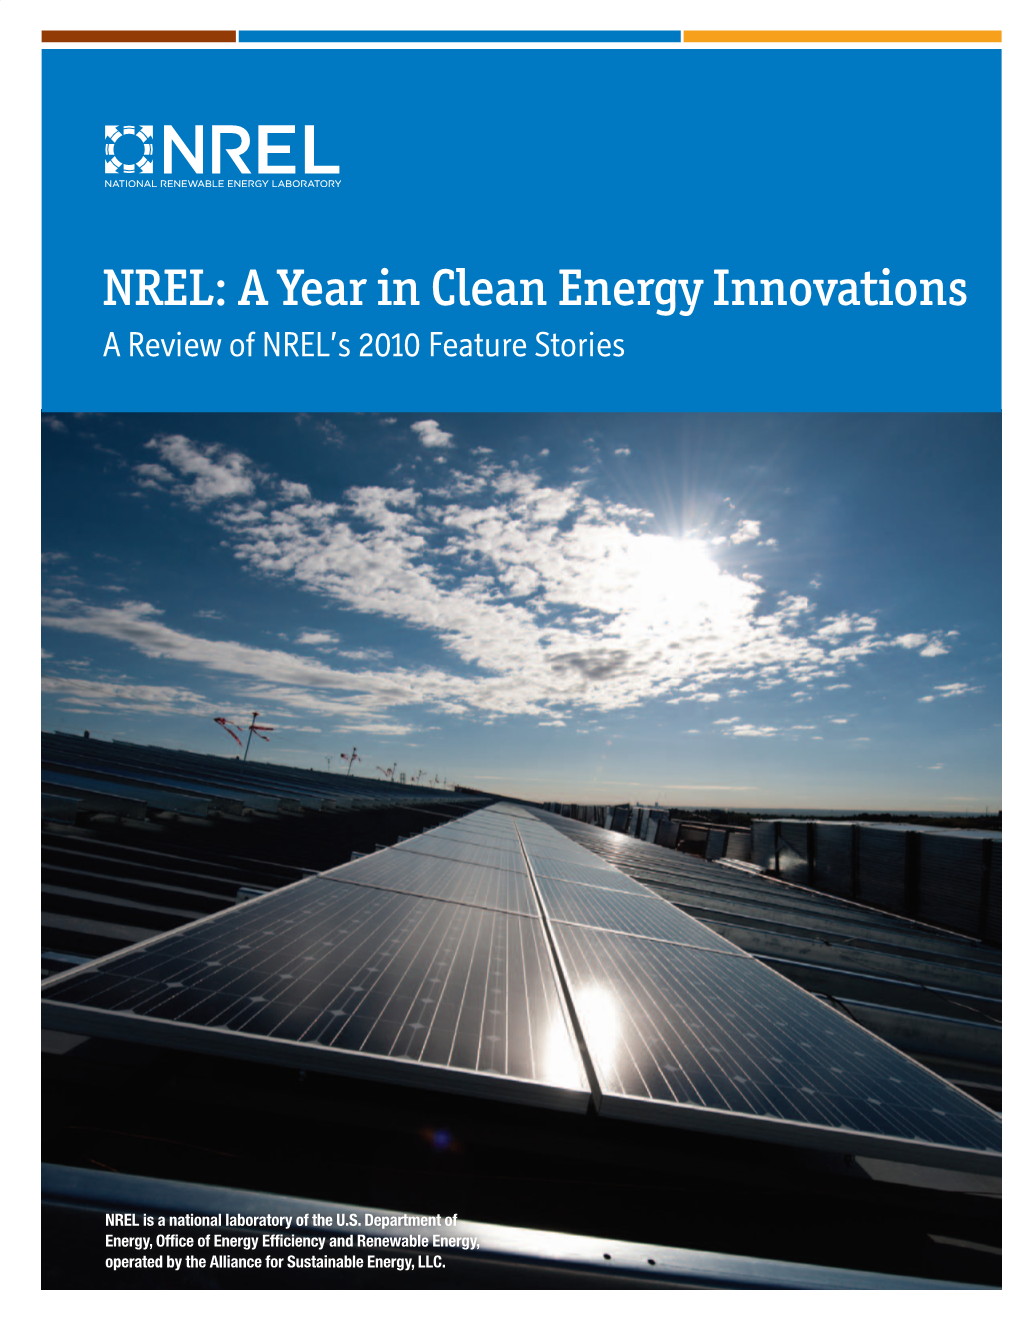 NREL: a Year in Clean Energy Innovations | a Review of NREL’S 2010 Feature Stories